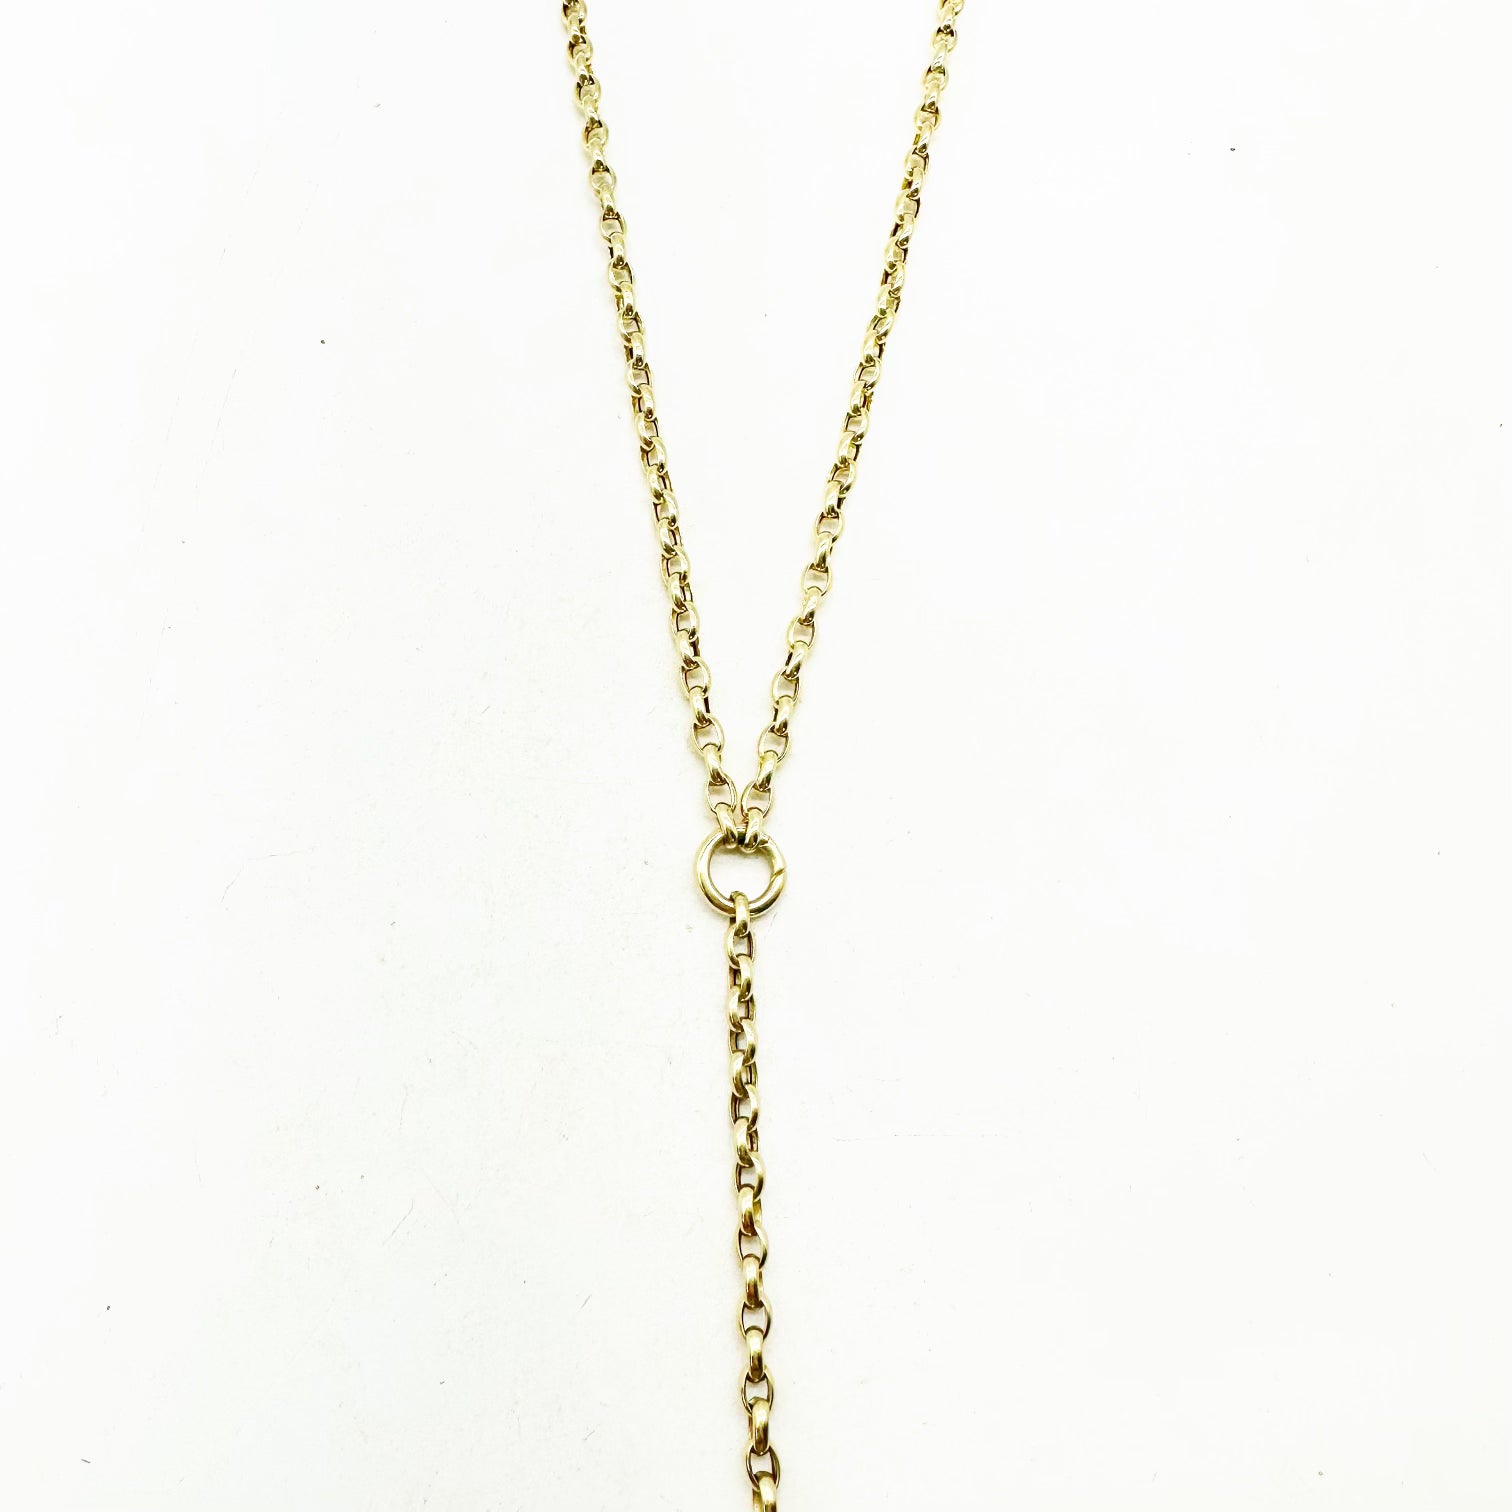 14K GOLD ELONGATED ROLO CHAIN WITH GOLD CHARM HOLDER